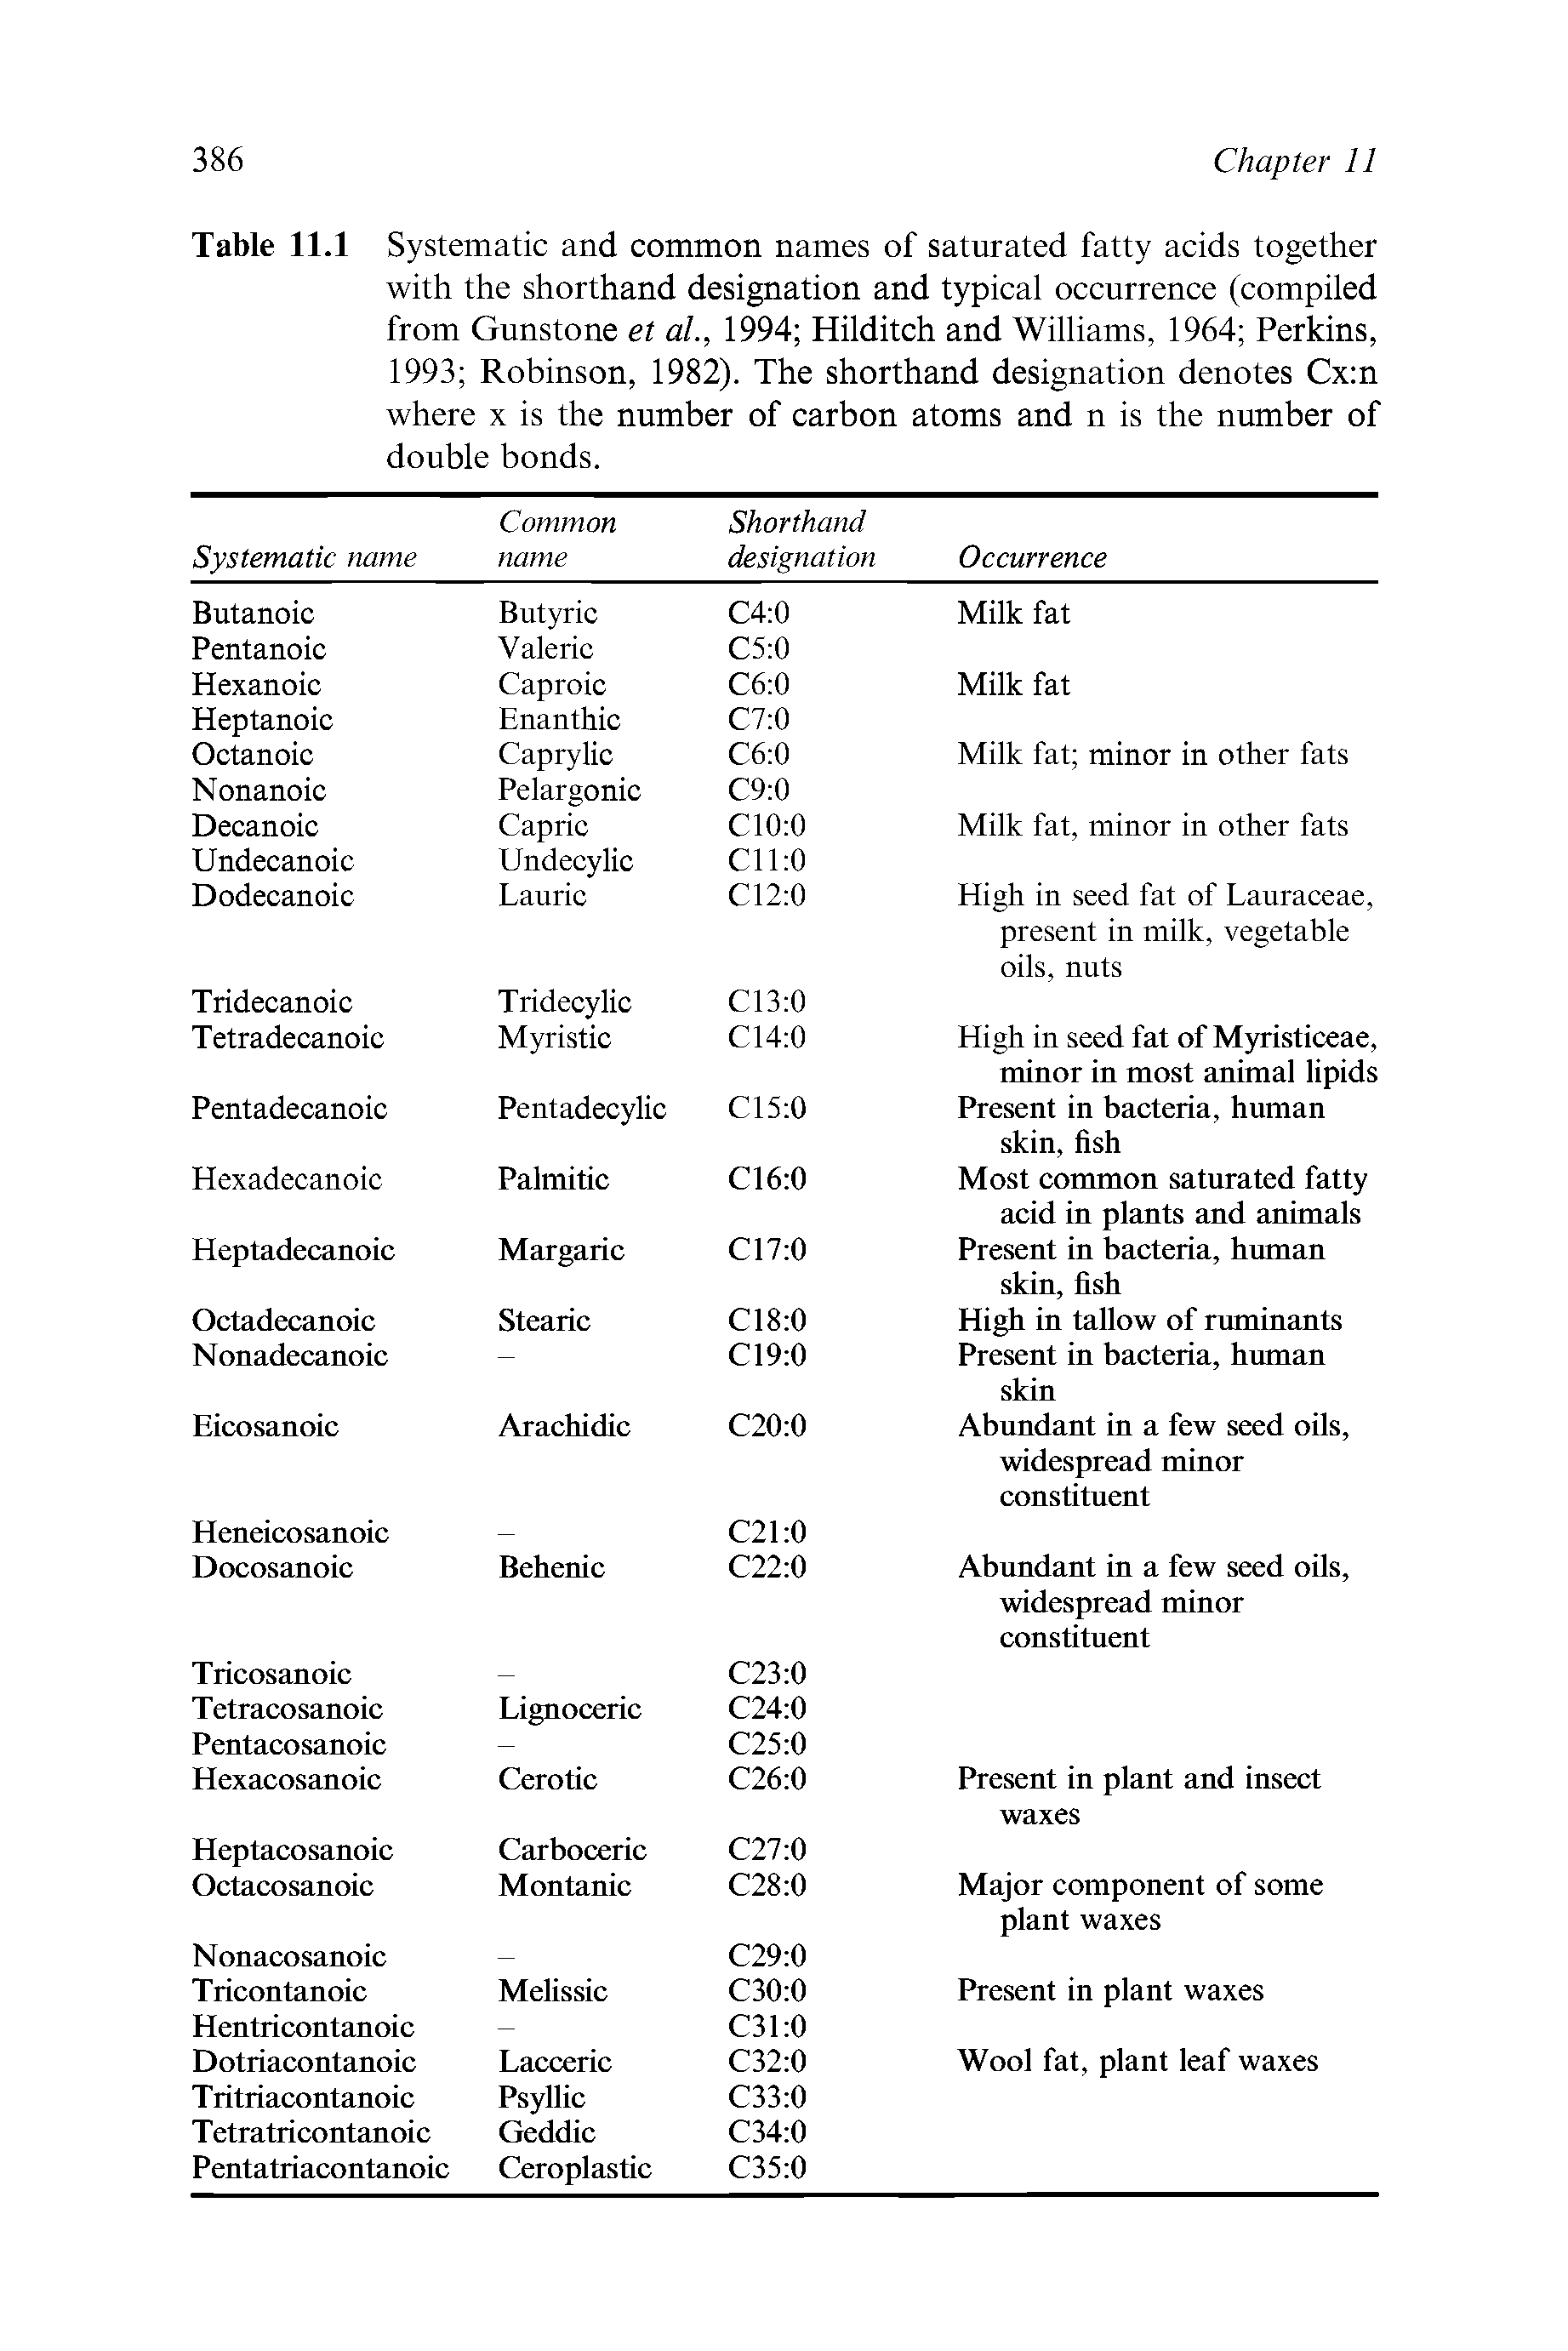 Table 11.1 Systematic and common names of saturated fatty acids together with the shorthand designation and typical occurrence (compiled from Gunstone et al., 1994 Hilditch and Williams, 1964 Perkins, 1993 Robinson, 1982). The shorthand designation denotes Cx n where x is the number of carbon atoms and n is the number of double bonds.